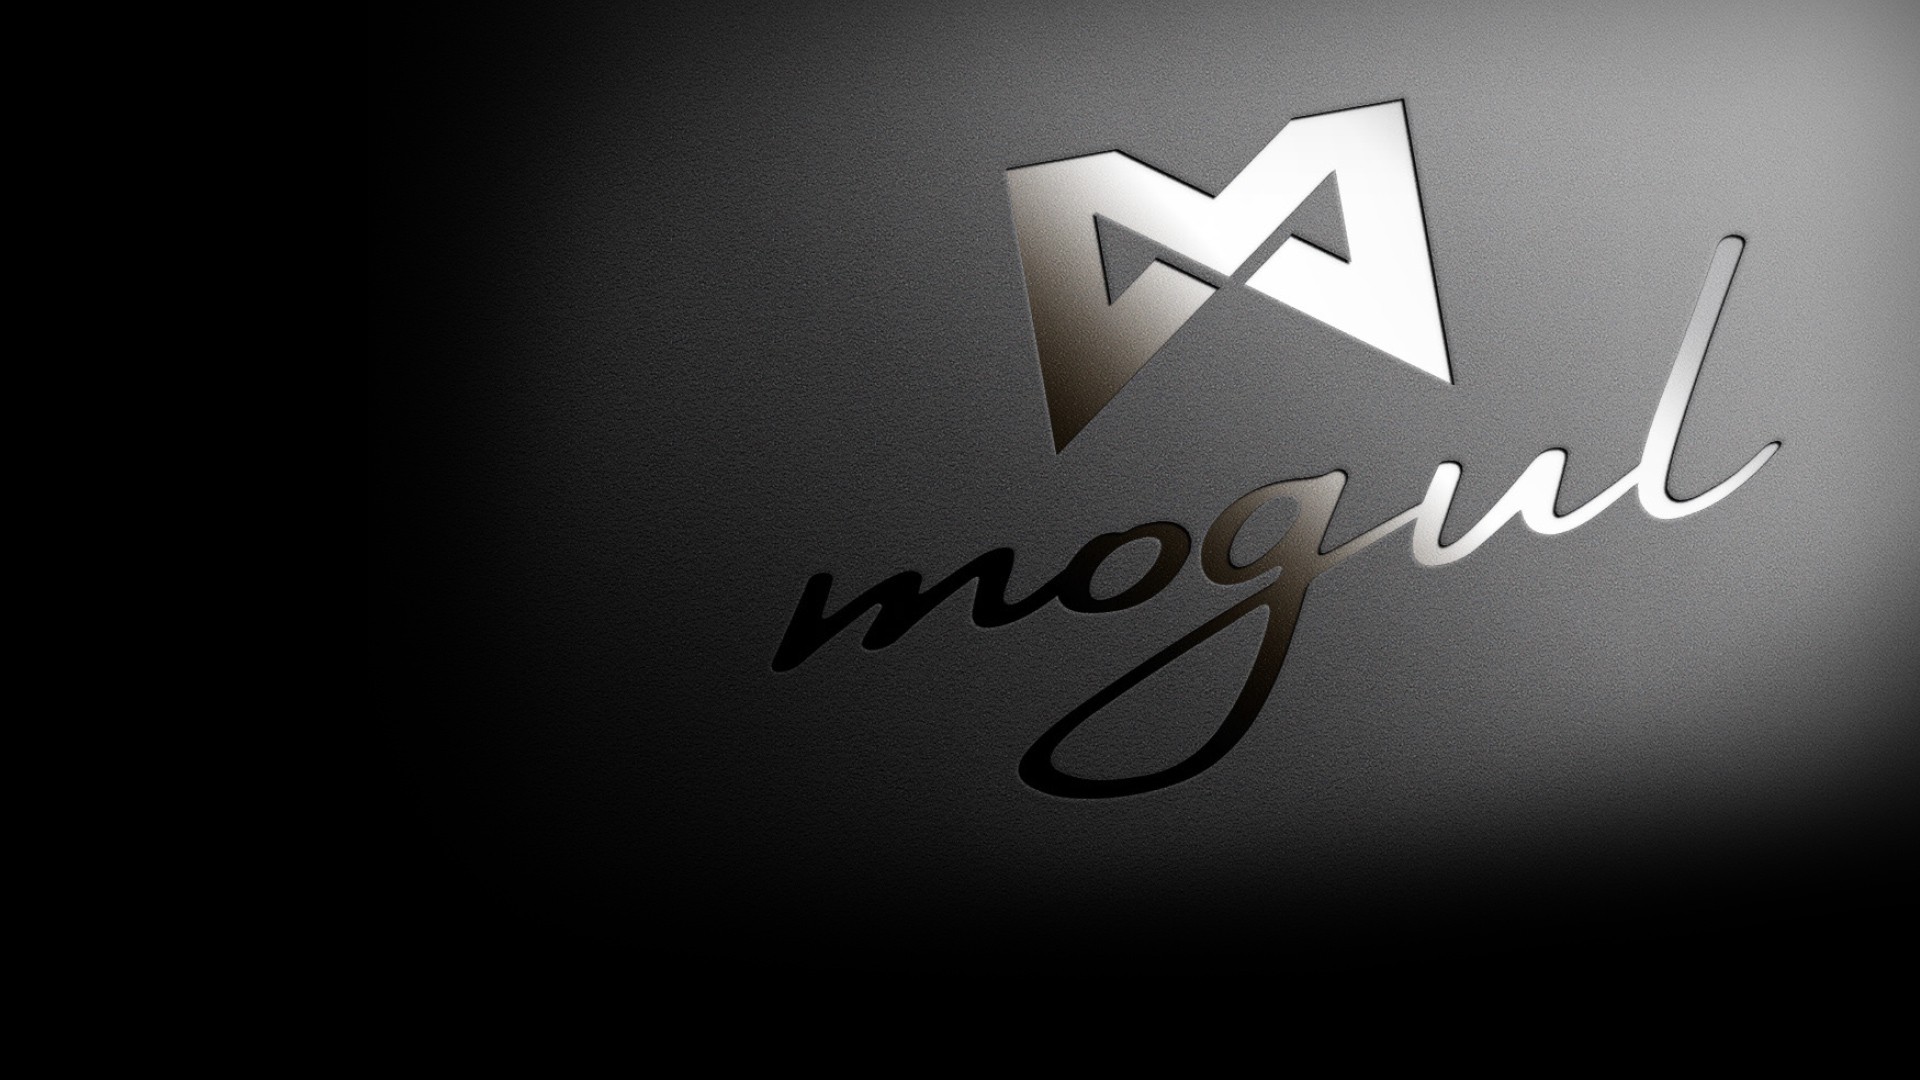 What a month for Mogul!